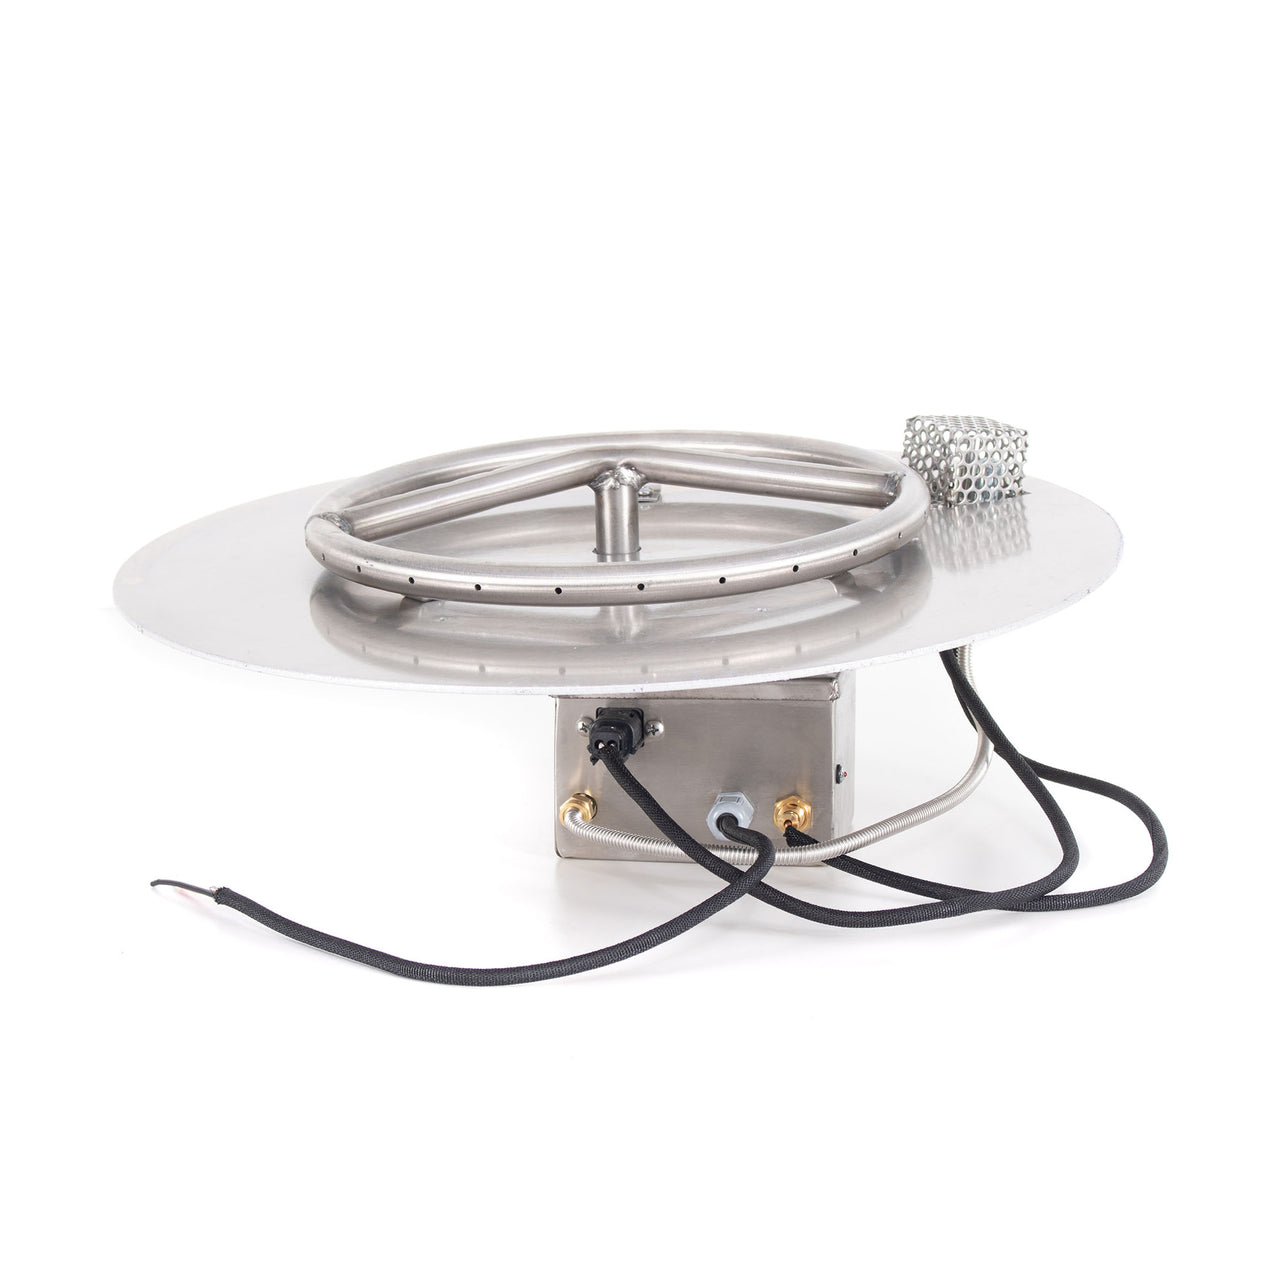 The Outdoor Plus 30" Round Flat Pan and 24" Stainless Steel Round Burner Kit